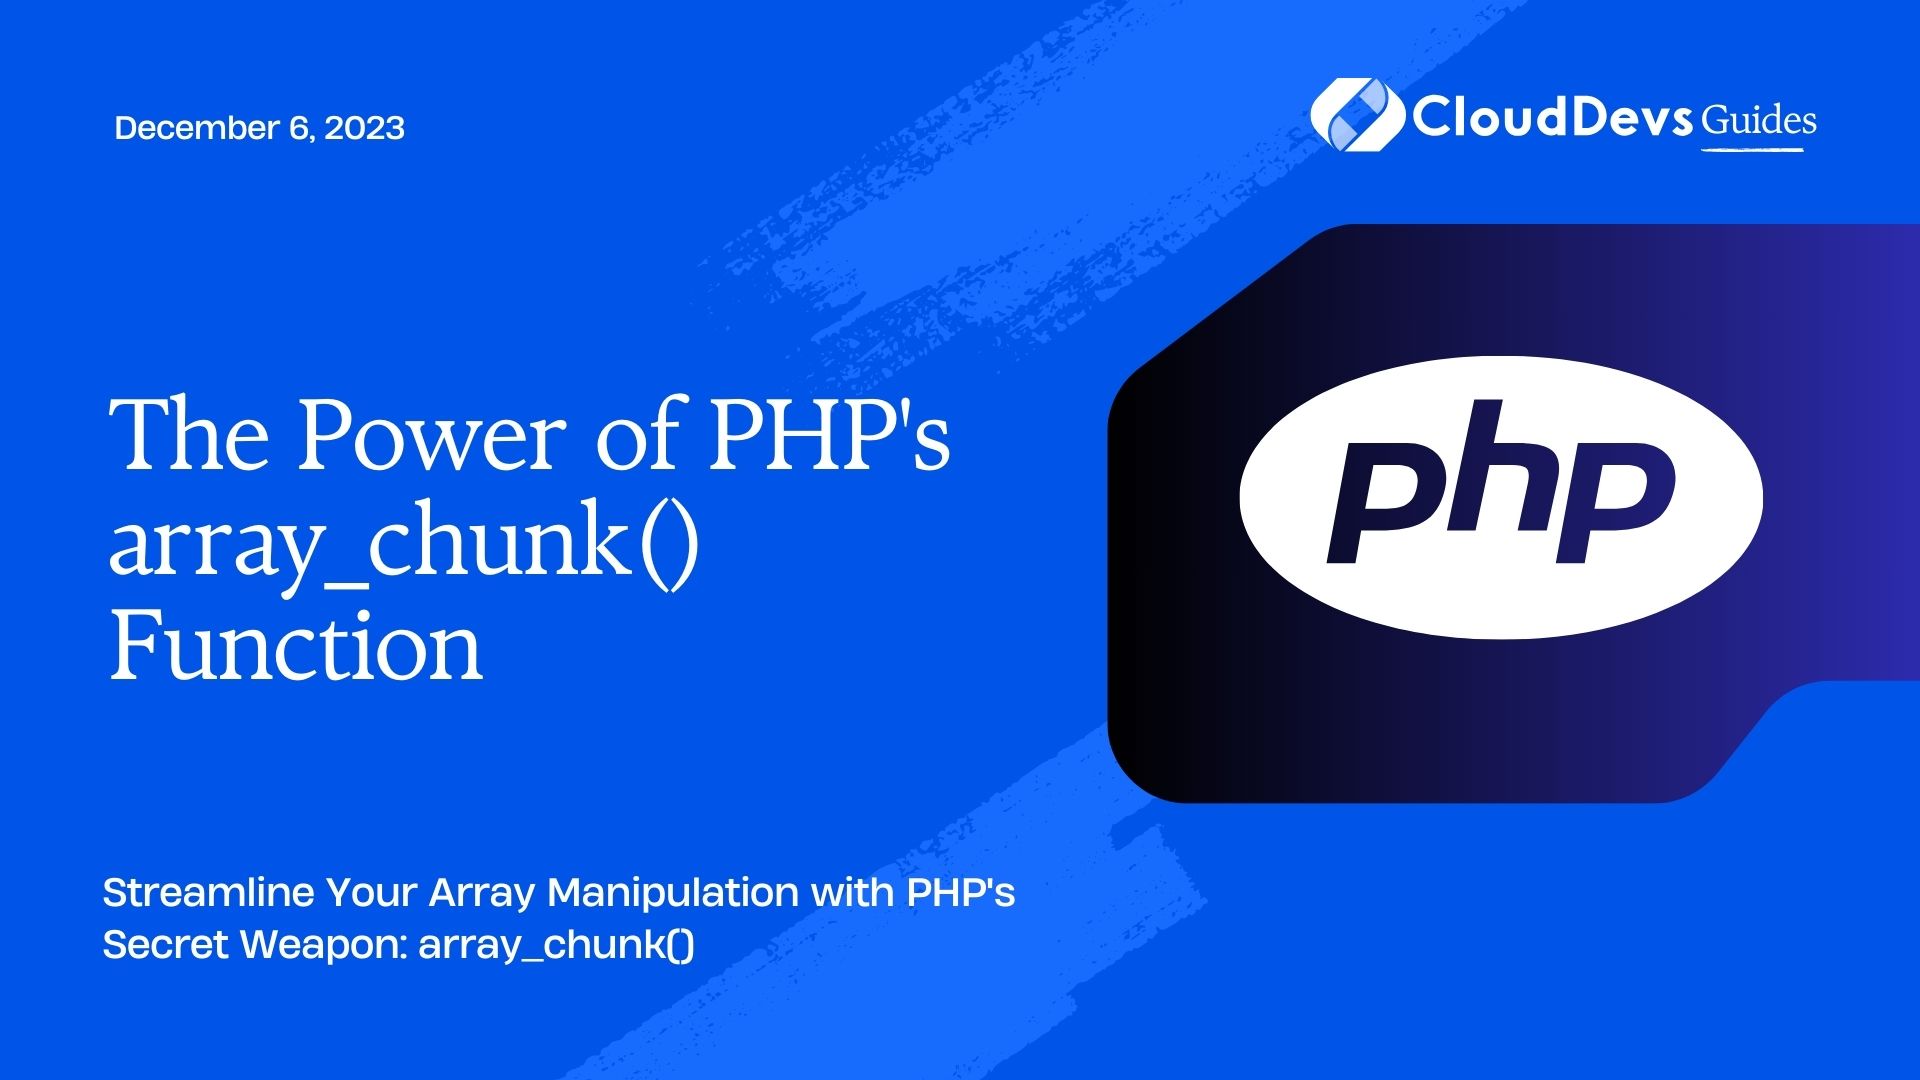 The Power of PHP's array_chunk() Function